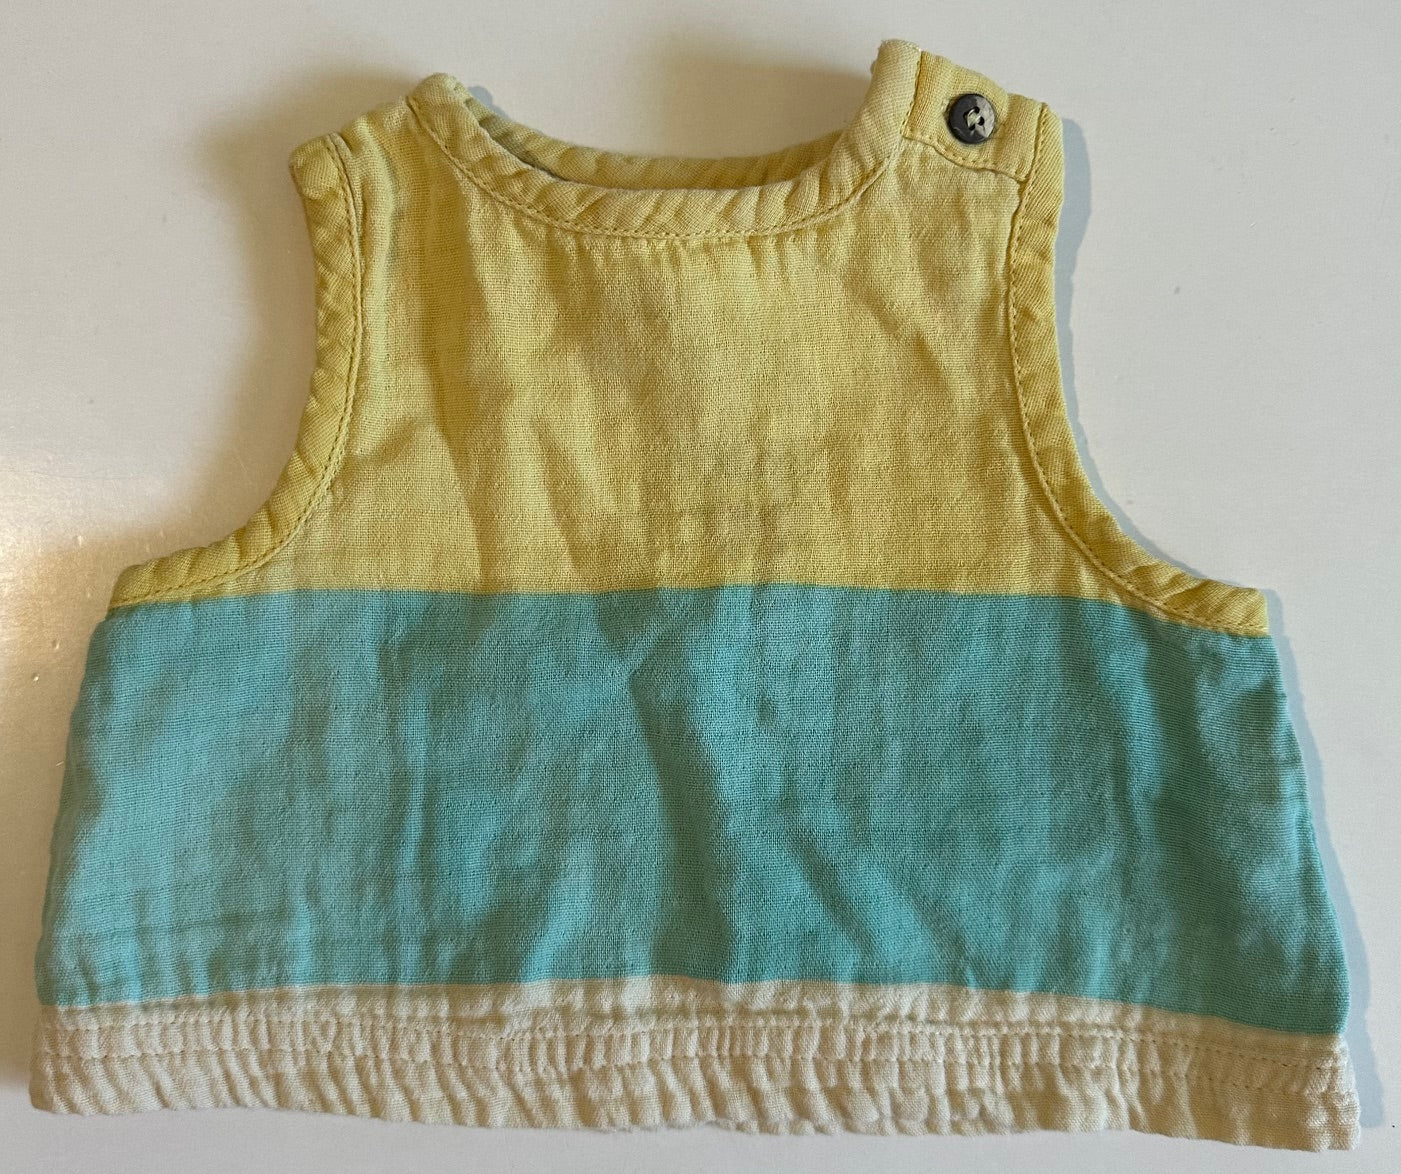 Coco Village, Yellow, Teal, and Ivory Shirt - 3 Months